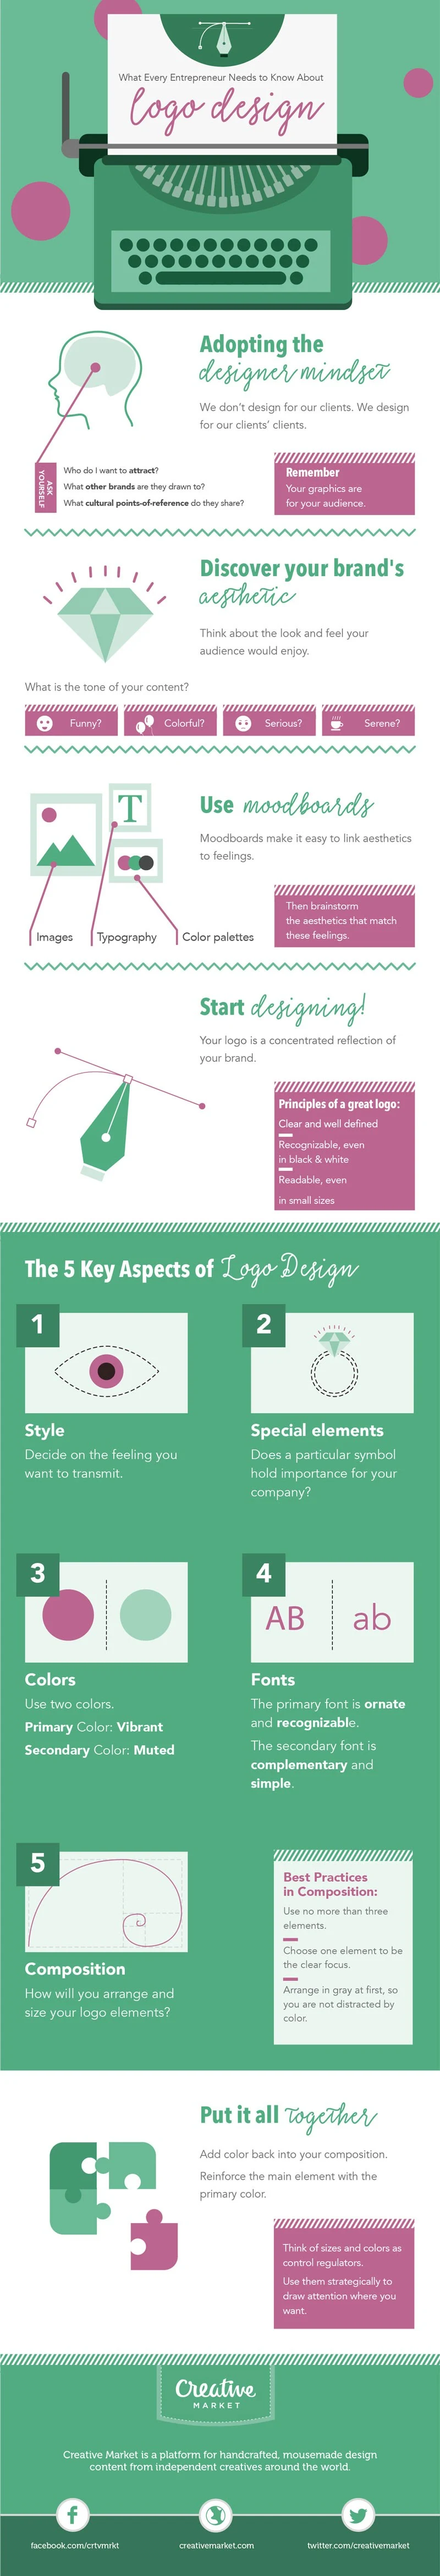 How to Create a Logo for a Startup - #infographic